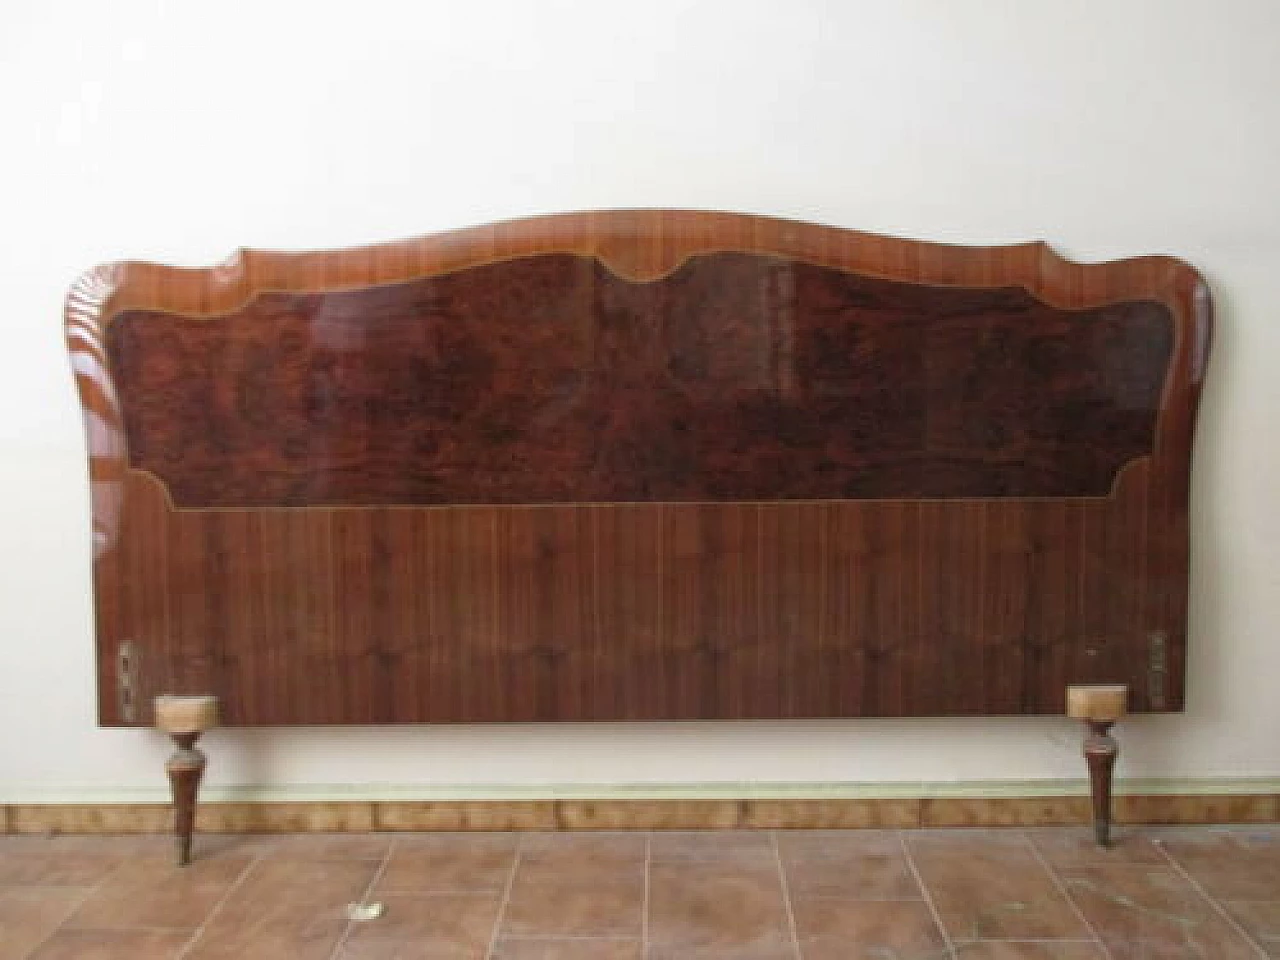 Rosewood double bed with inlays, 1950s 1330783